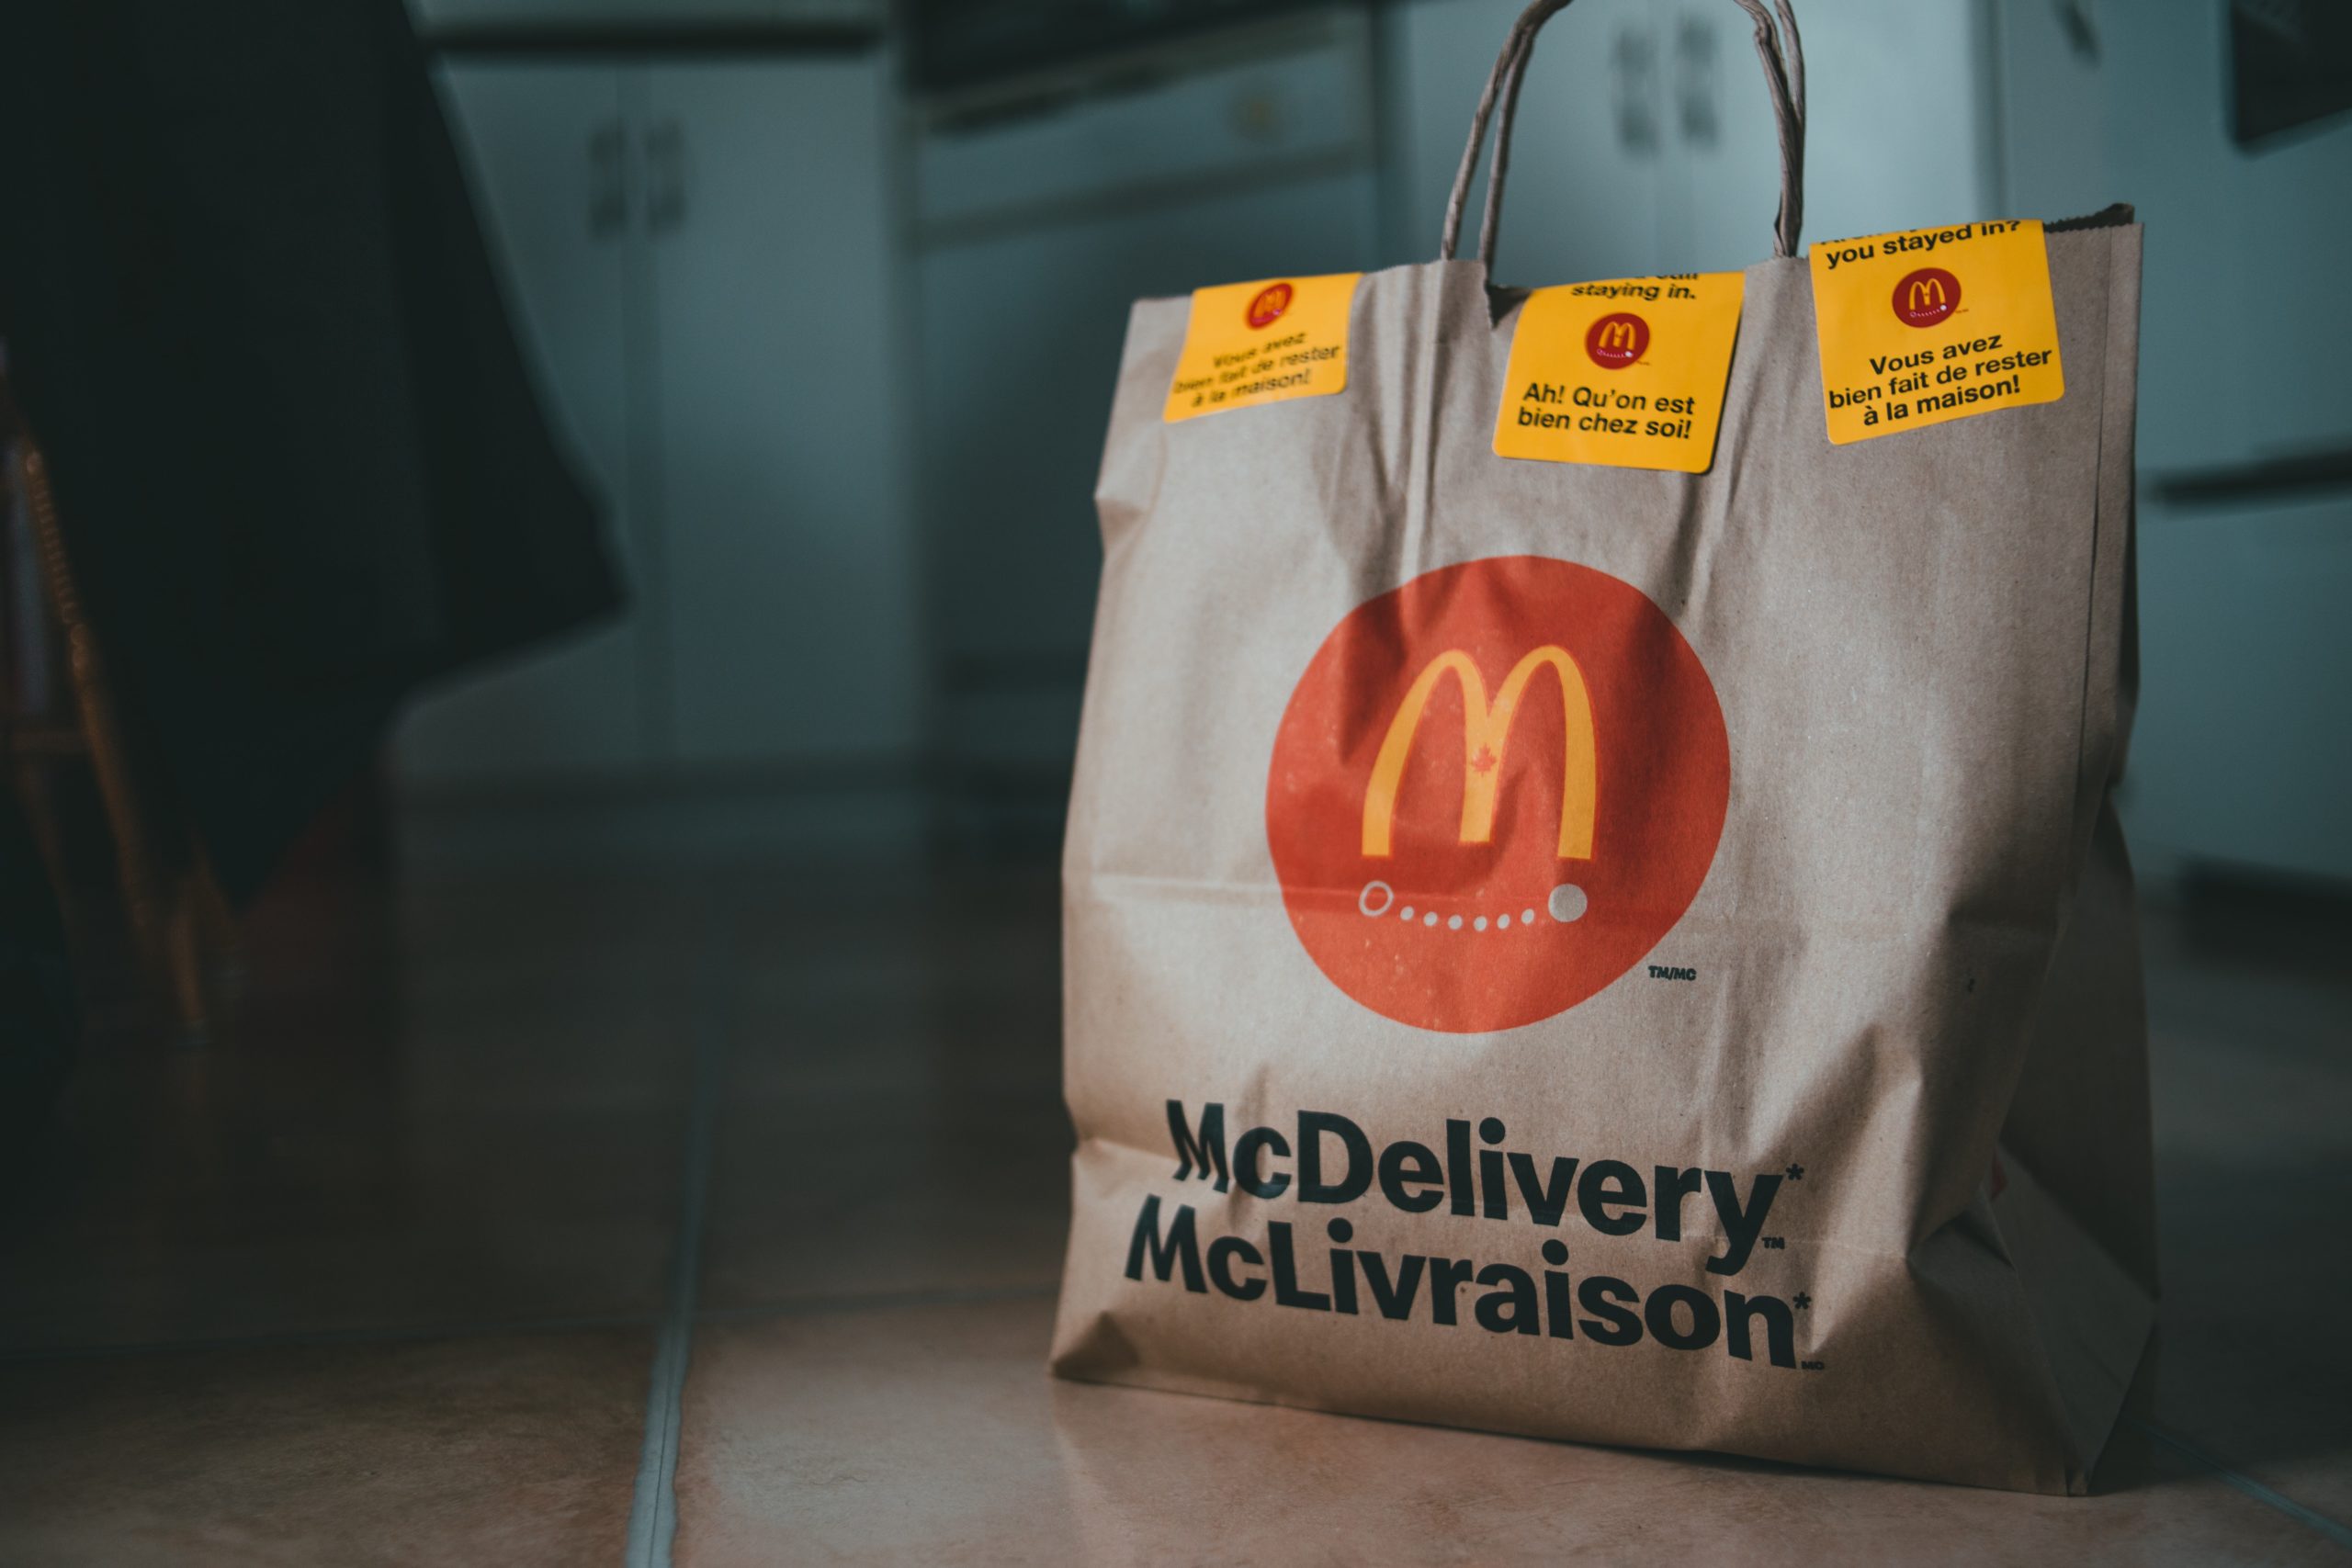 McDonald's - Delivery Available at 3500 location In US